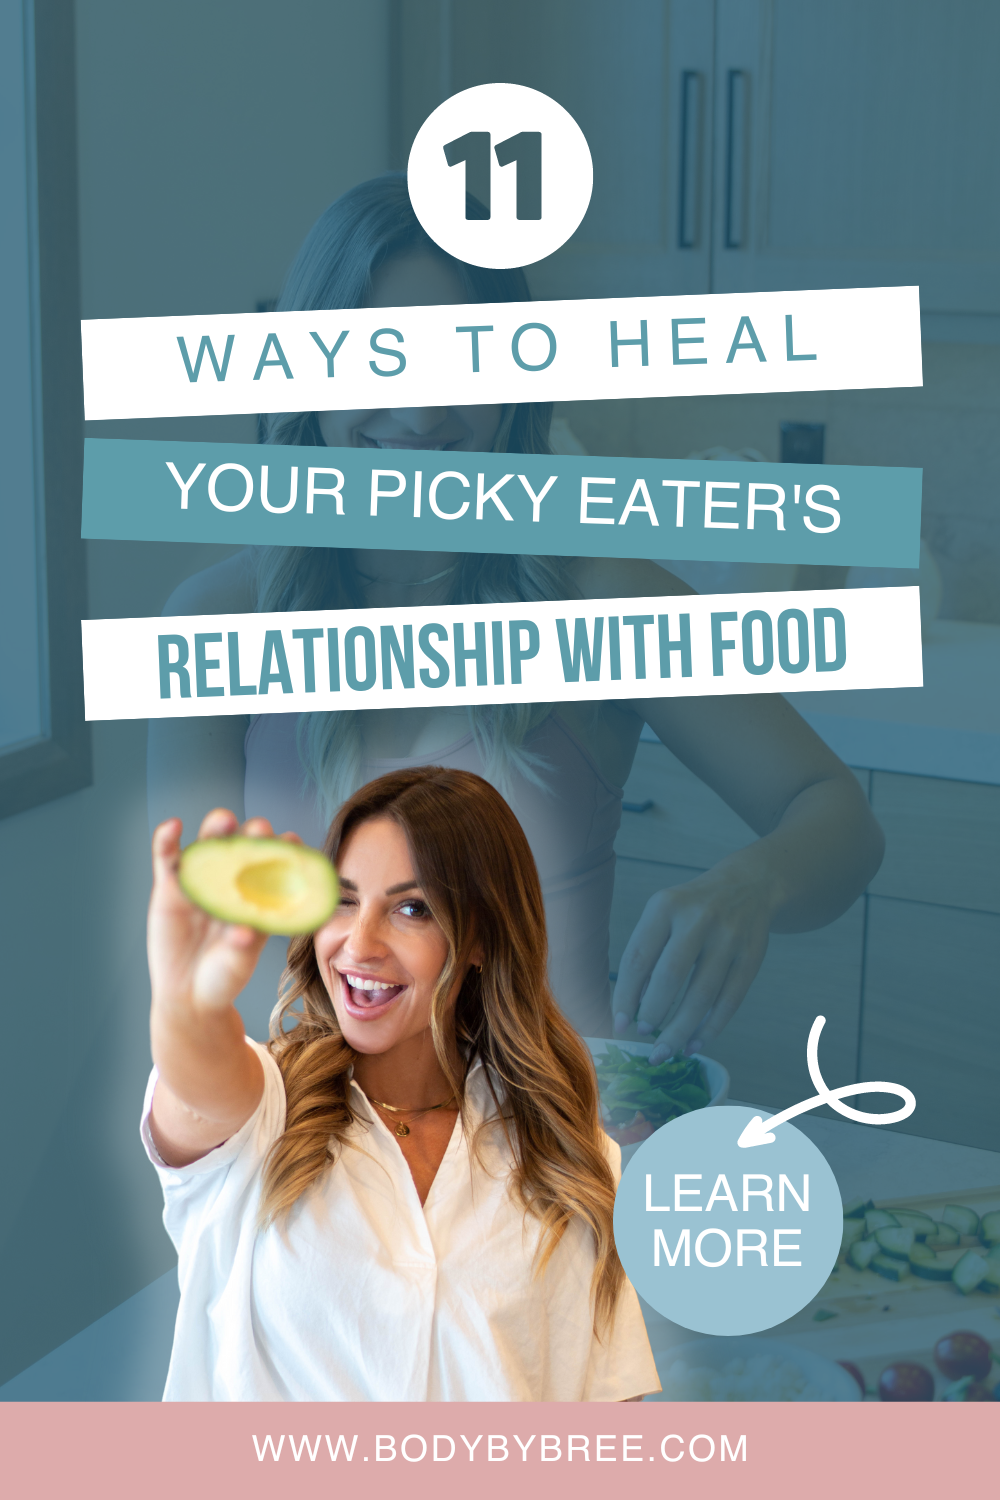 HEAL YOUR PICKY EATER'S RELATIONSHIP WITH FOOD